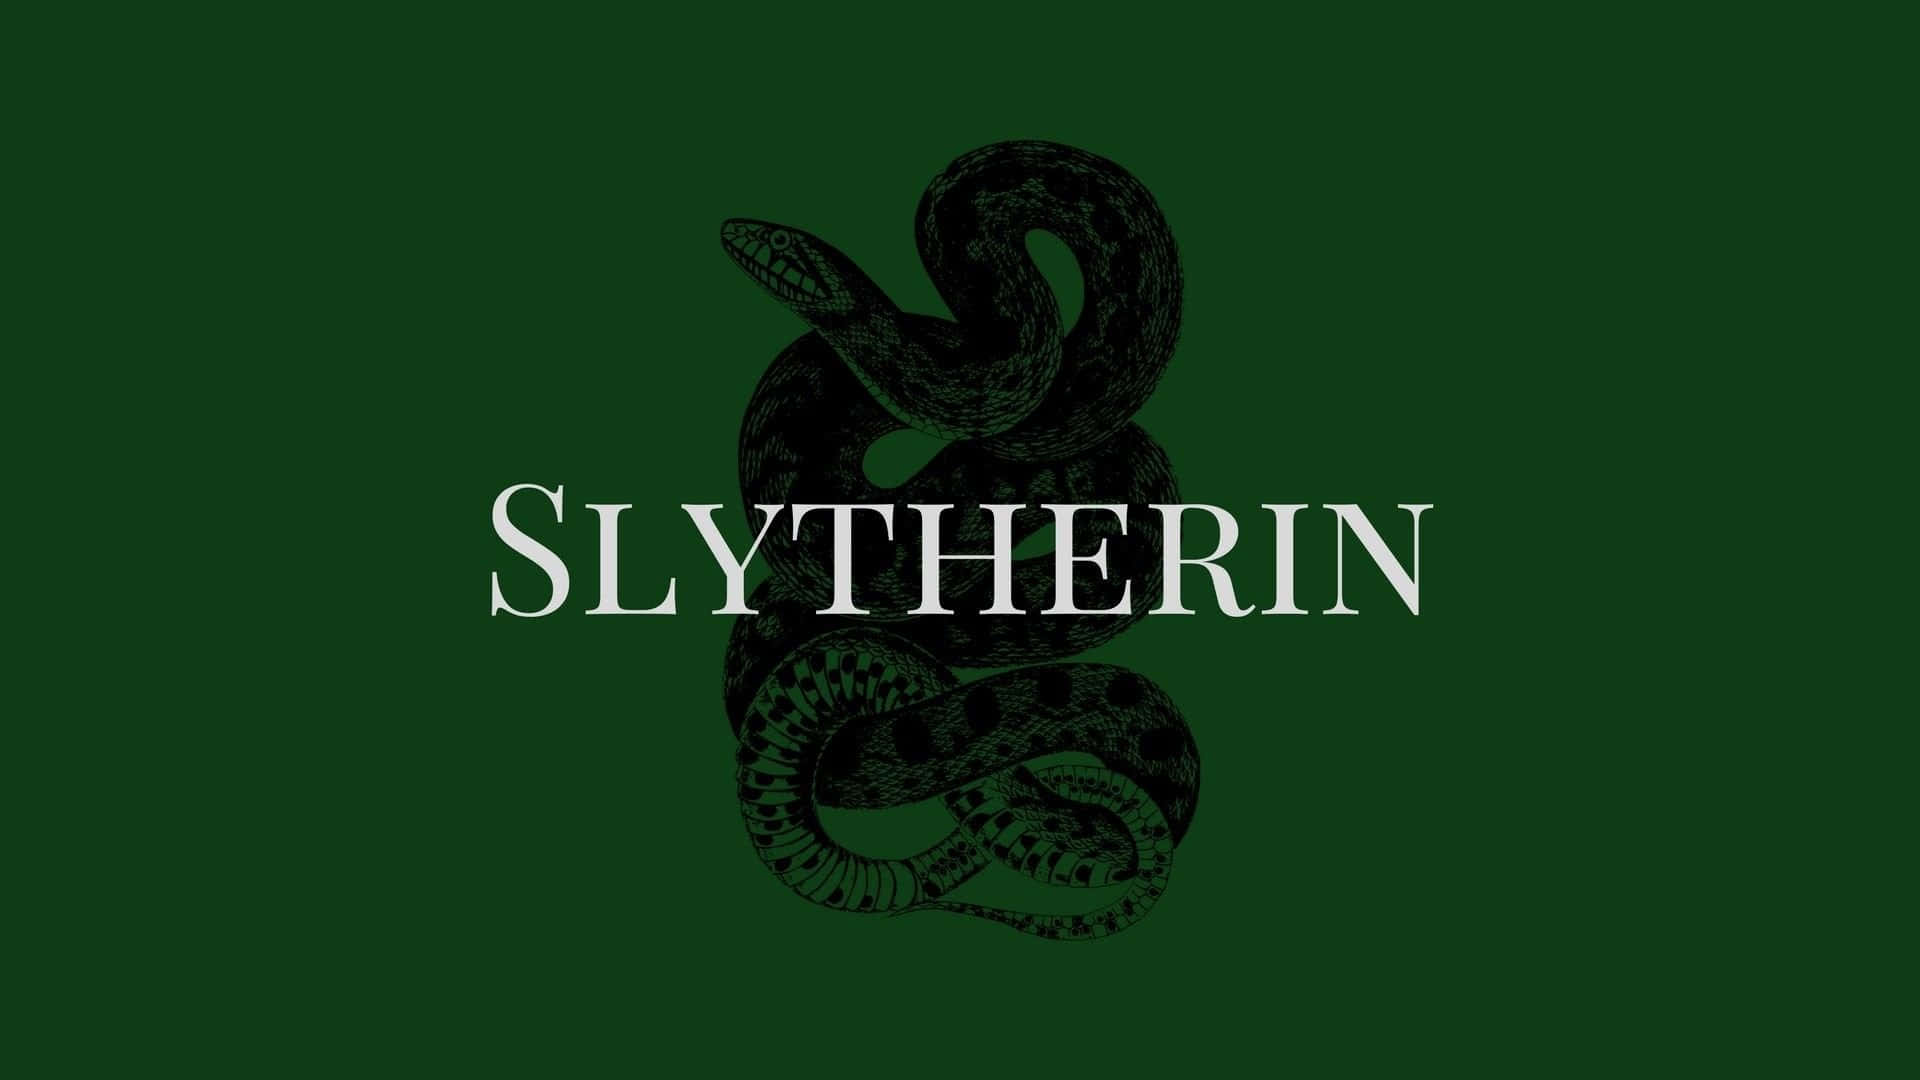 Who will prevail in the epic battle between Gryffindors and Slytherins?